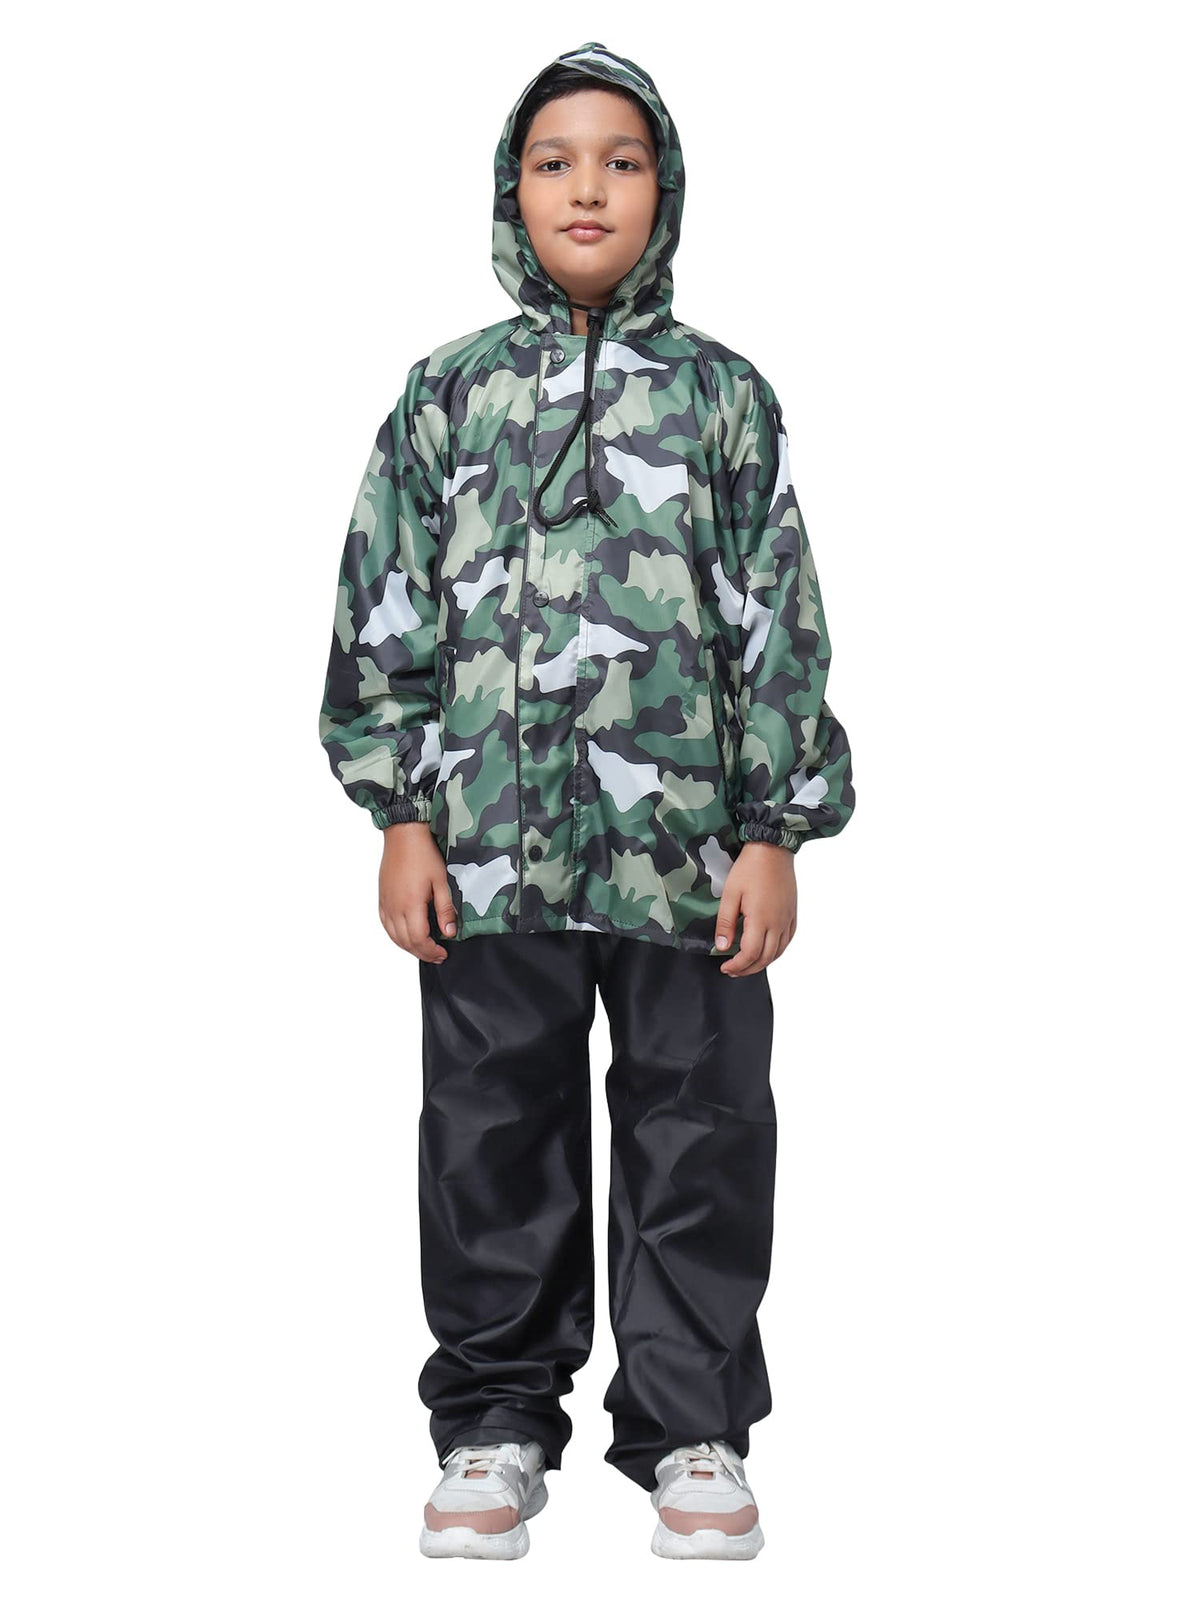 STRAUSS THE CLOWNFISH Comrad Series Kids Waterproof Nylon Double Coating Reversible Raincoat with Hood and Reflector Logo at Back. Set of Top and Bottom. Printed Pouch.14-16 years(Green Camo)